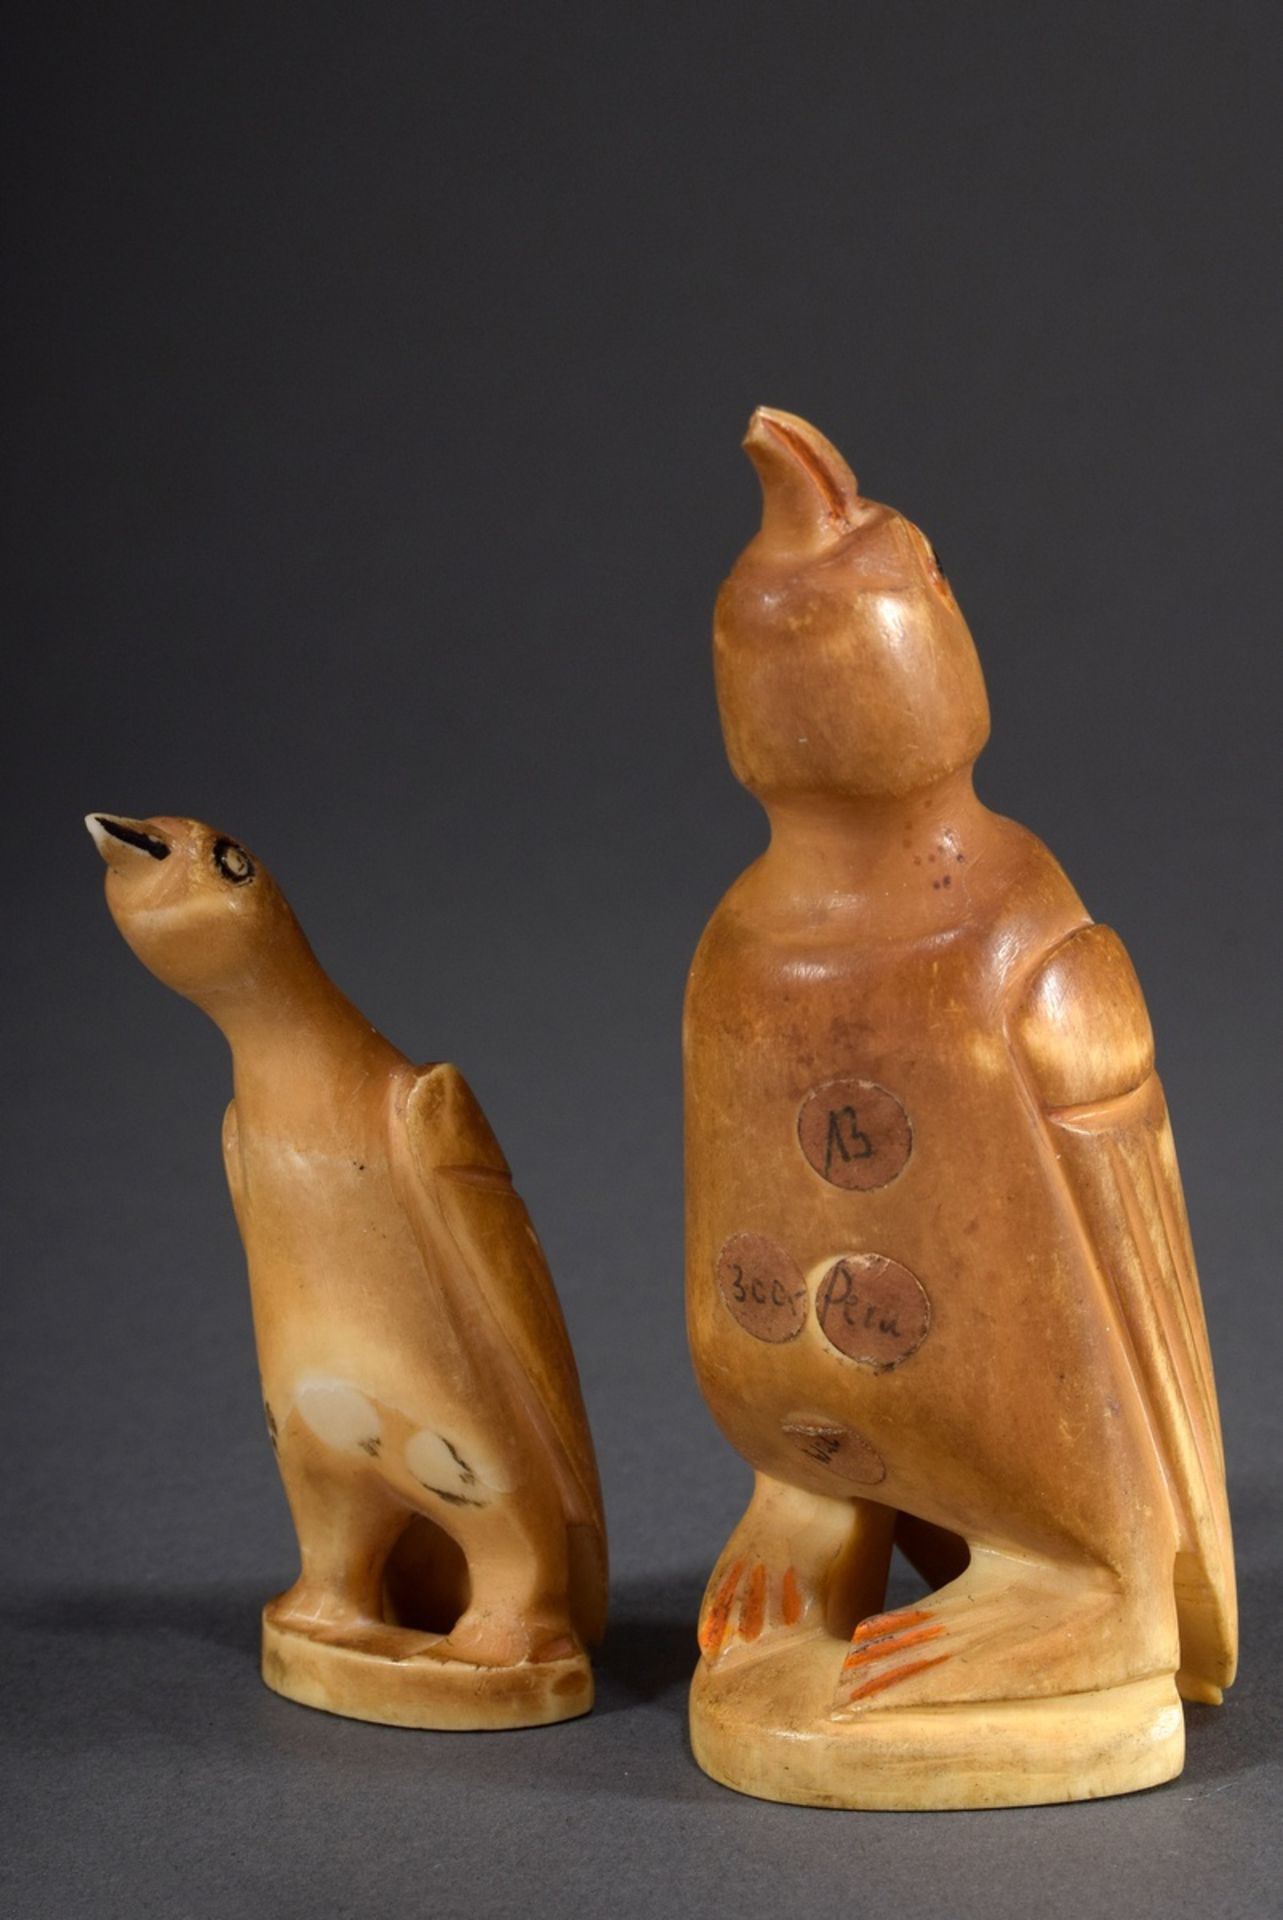 2 Diverse Walzahn Schnitzereien "Pinguine", Alas | 2 Various whale tooth carvings "Penguins", Alask - Image 3 of 4